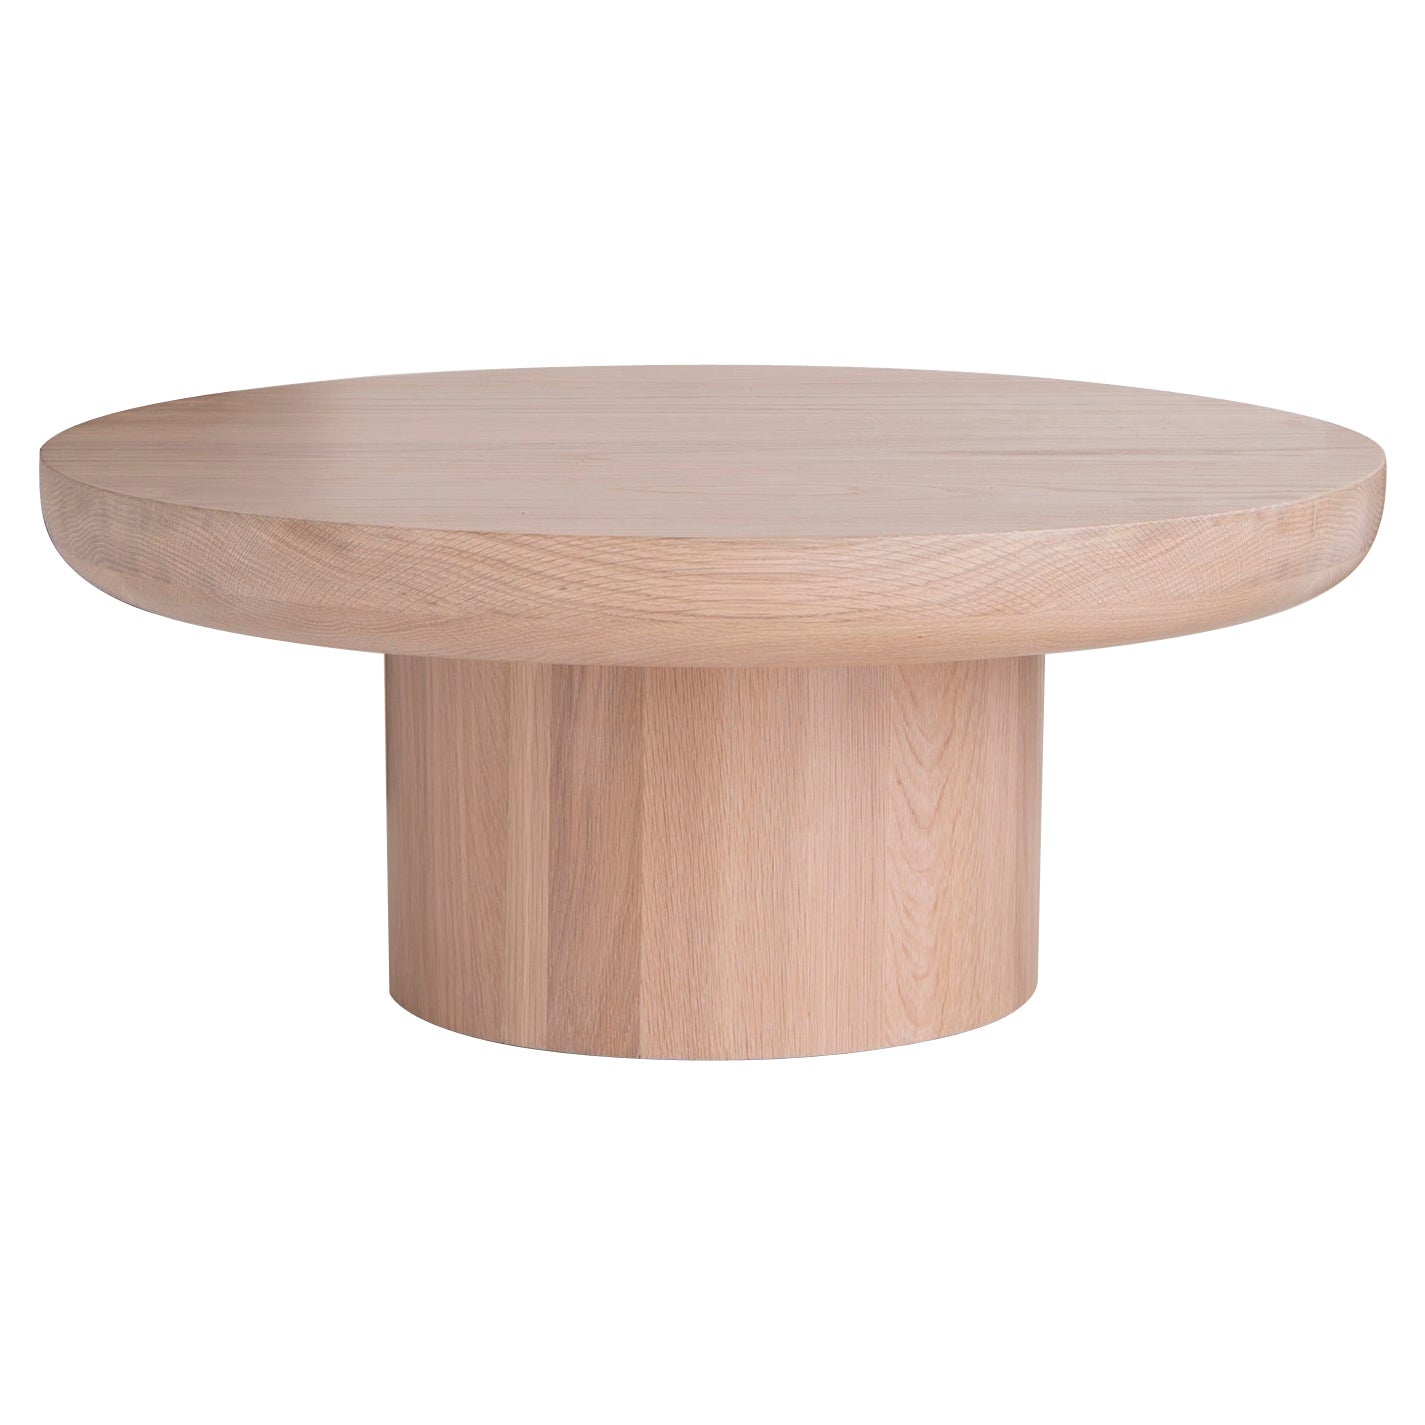 Dombak Coffee Table by Phase Design For Sale